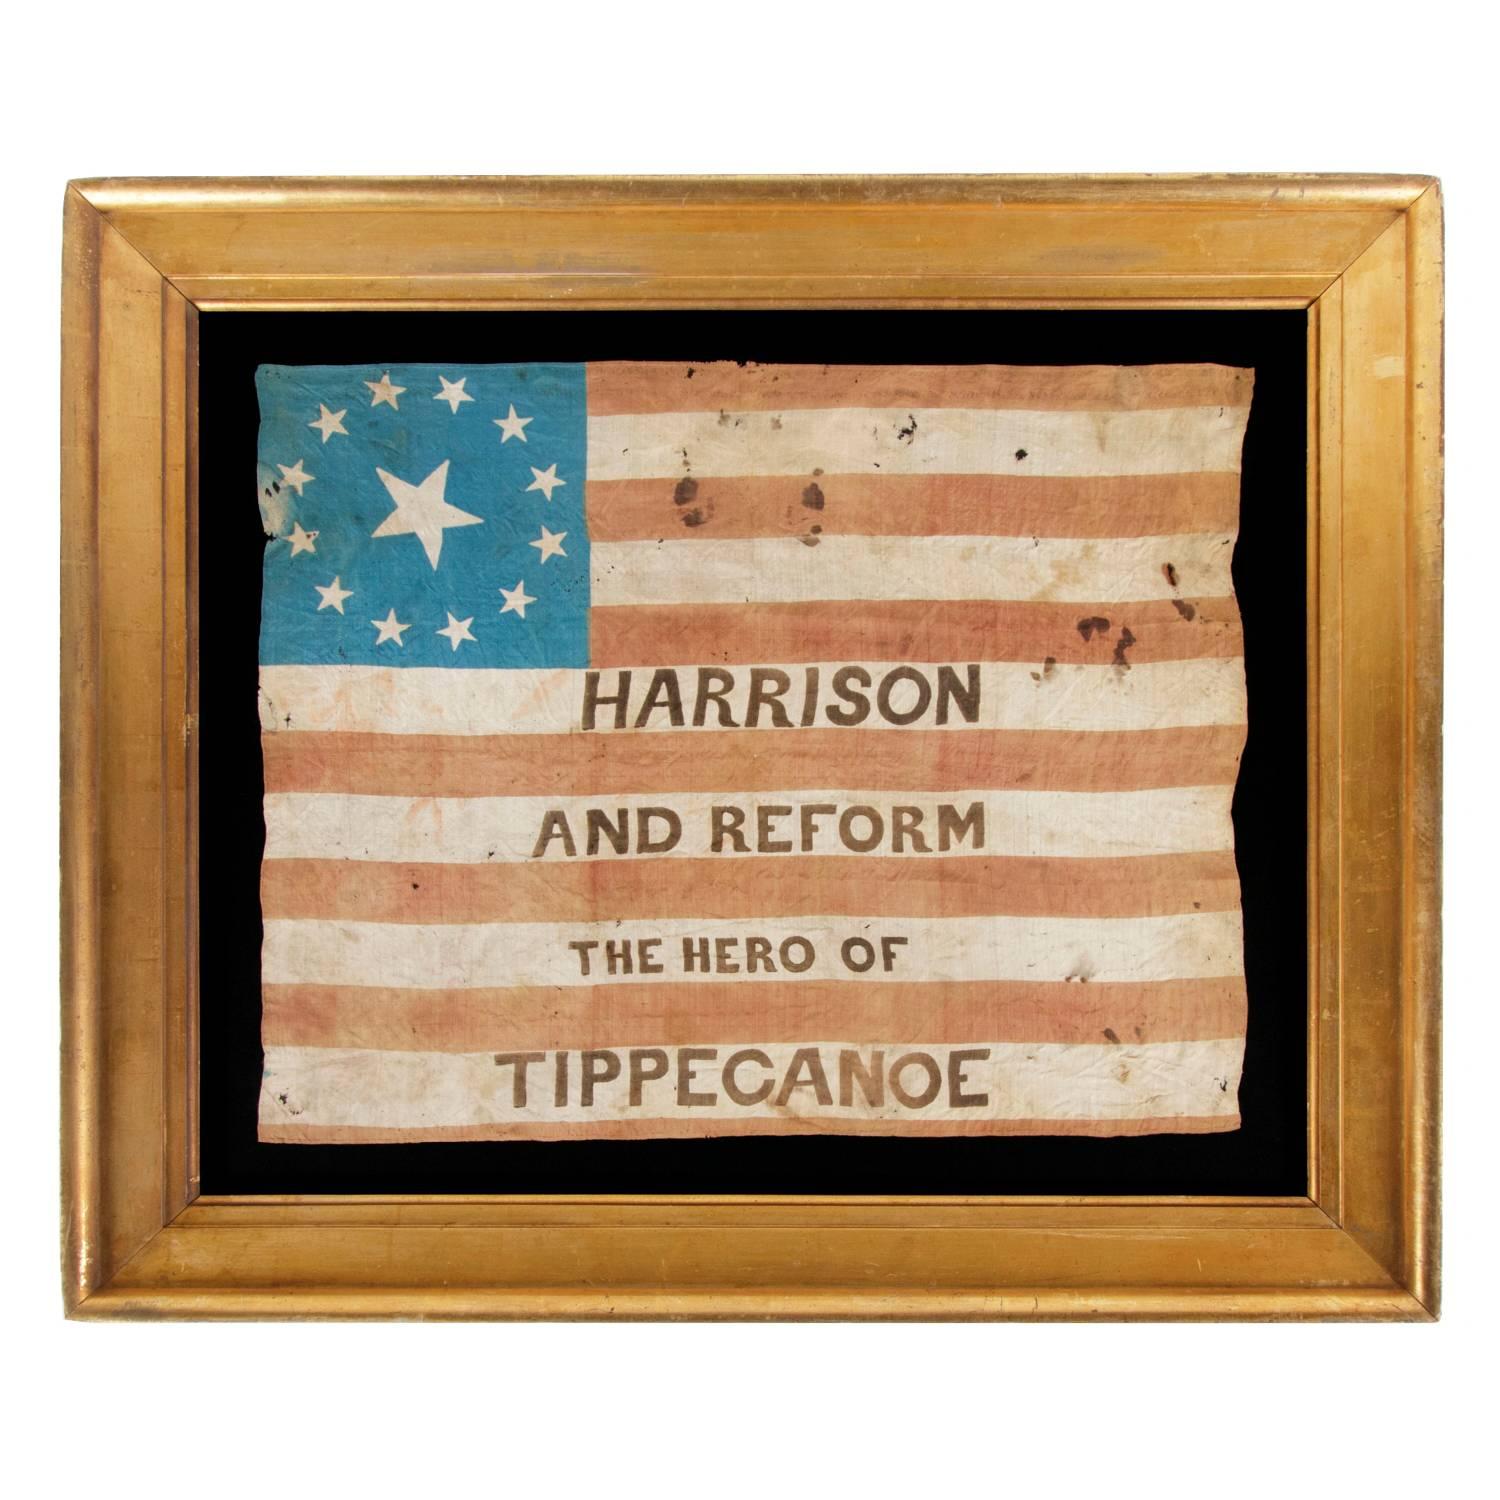 One of the Earliest Known Parade Flags, 1840 Campaign of William Henry Harrison